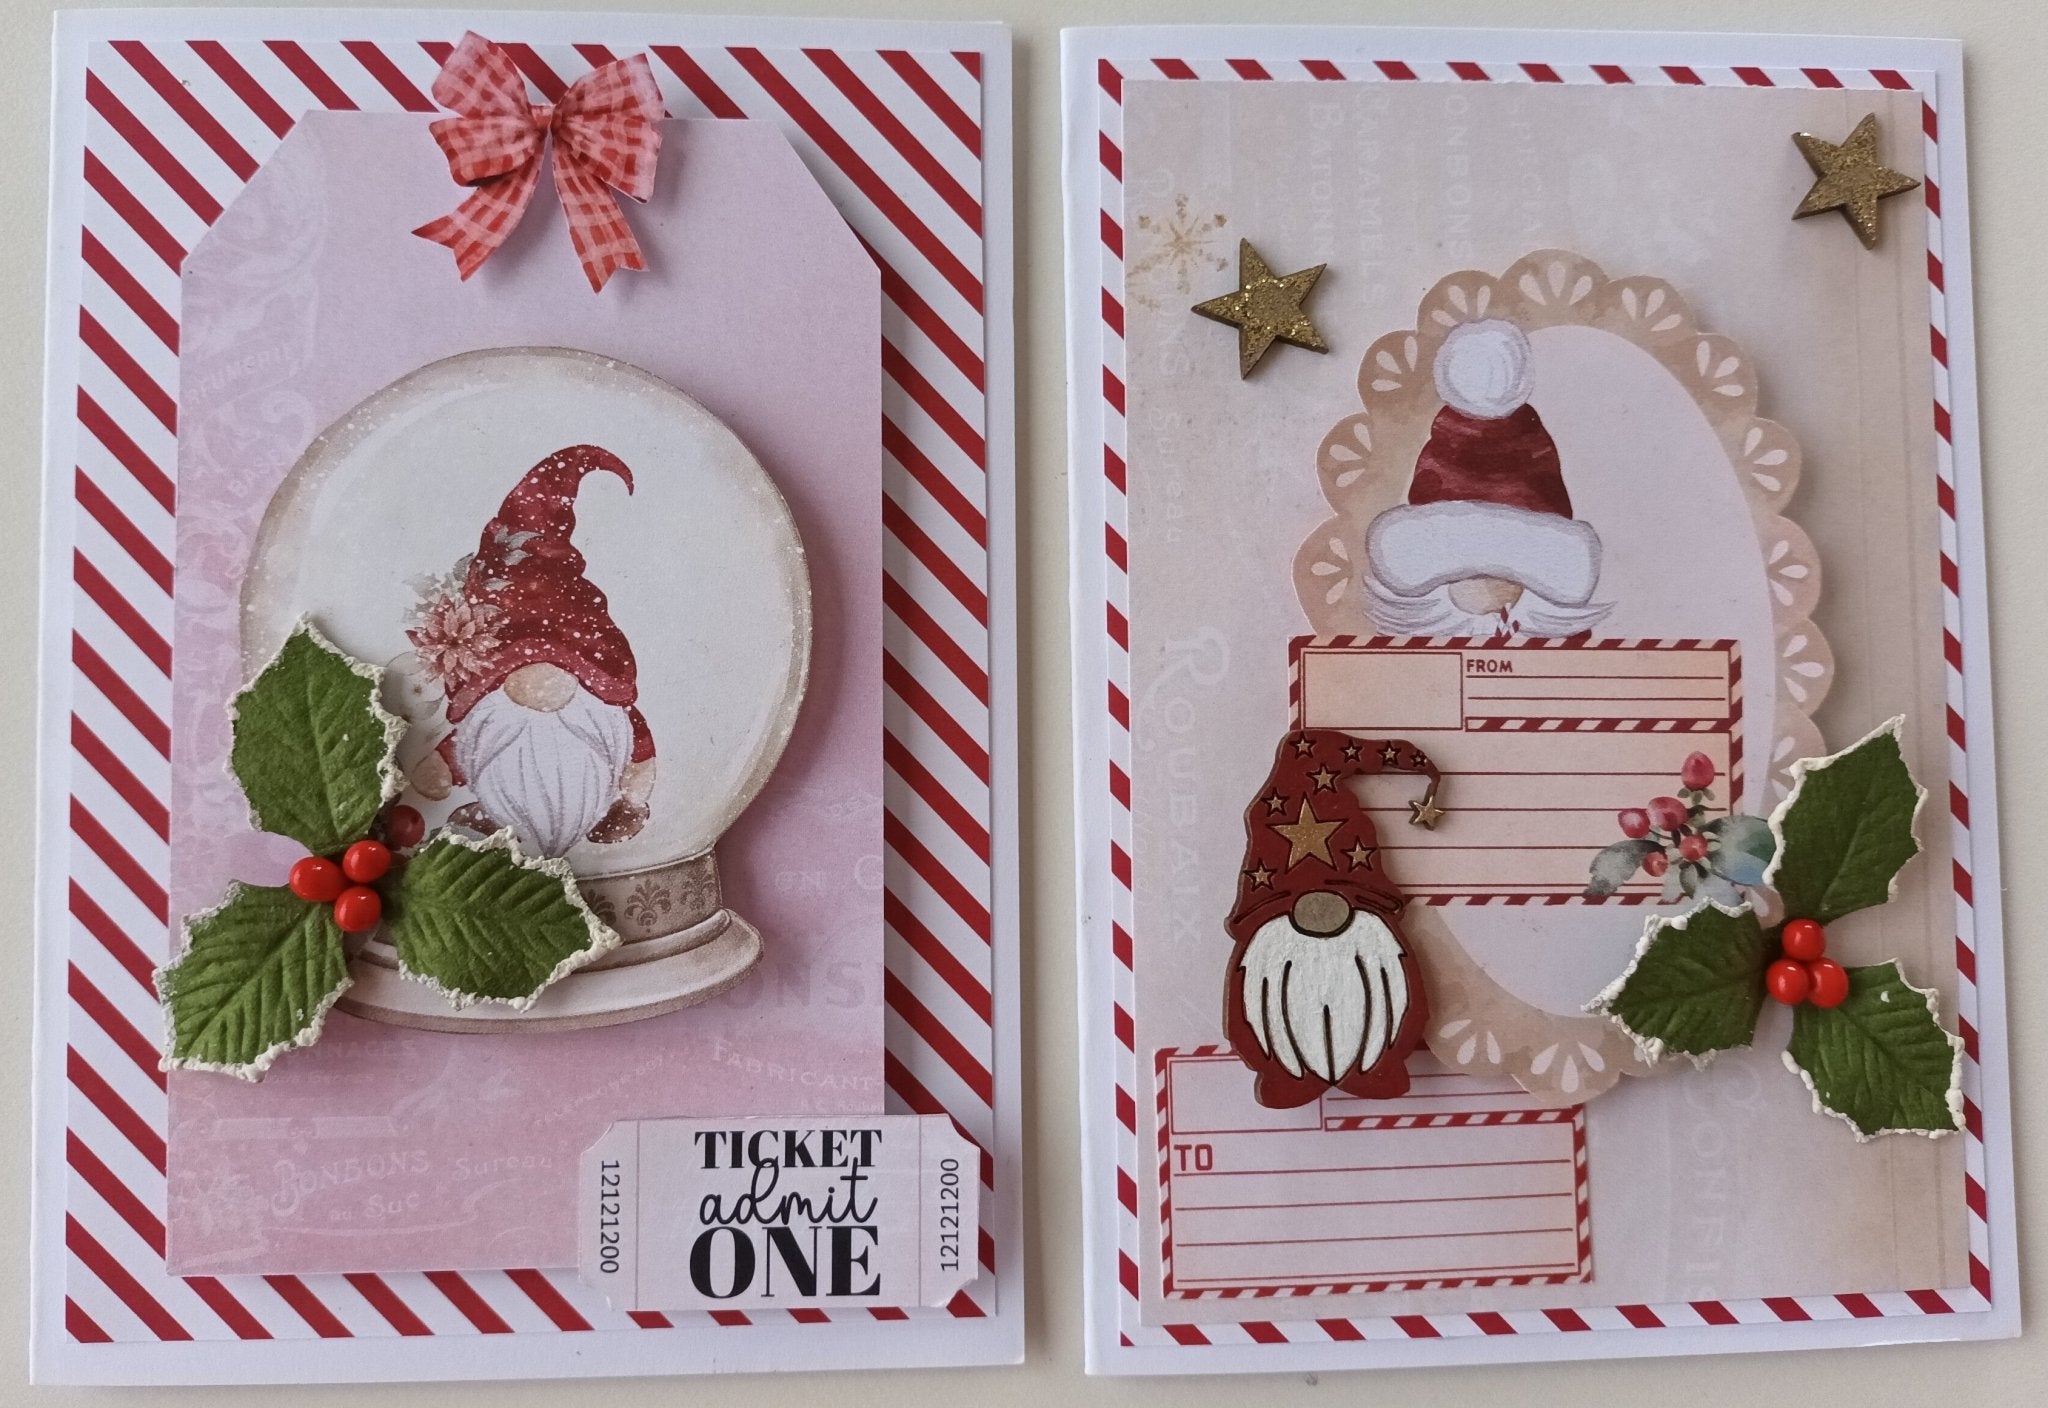 Christmas Eve Page and Card Kit - Crafty Divas